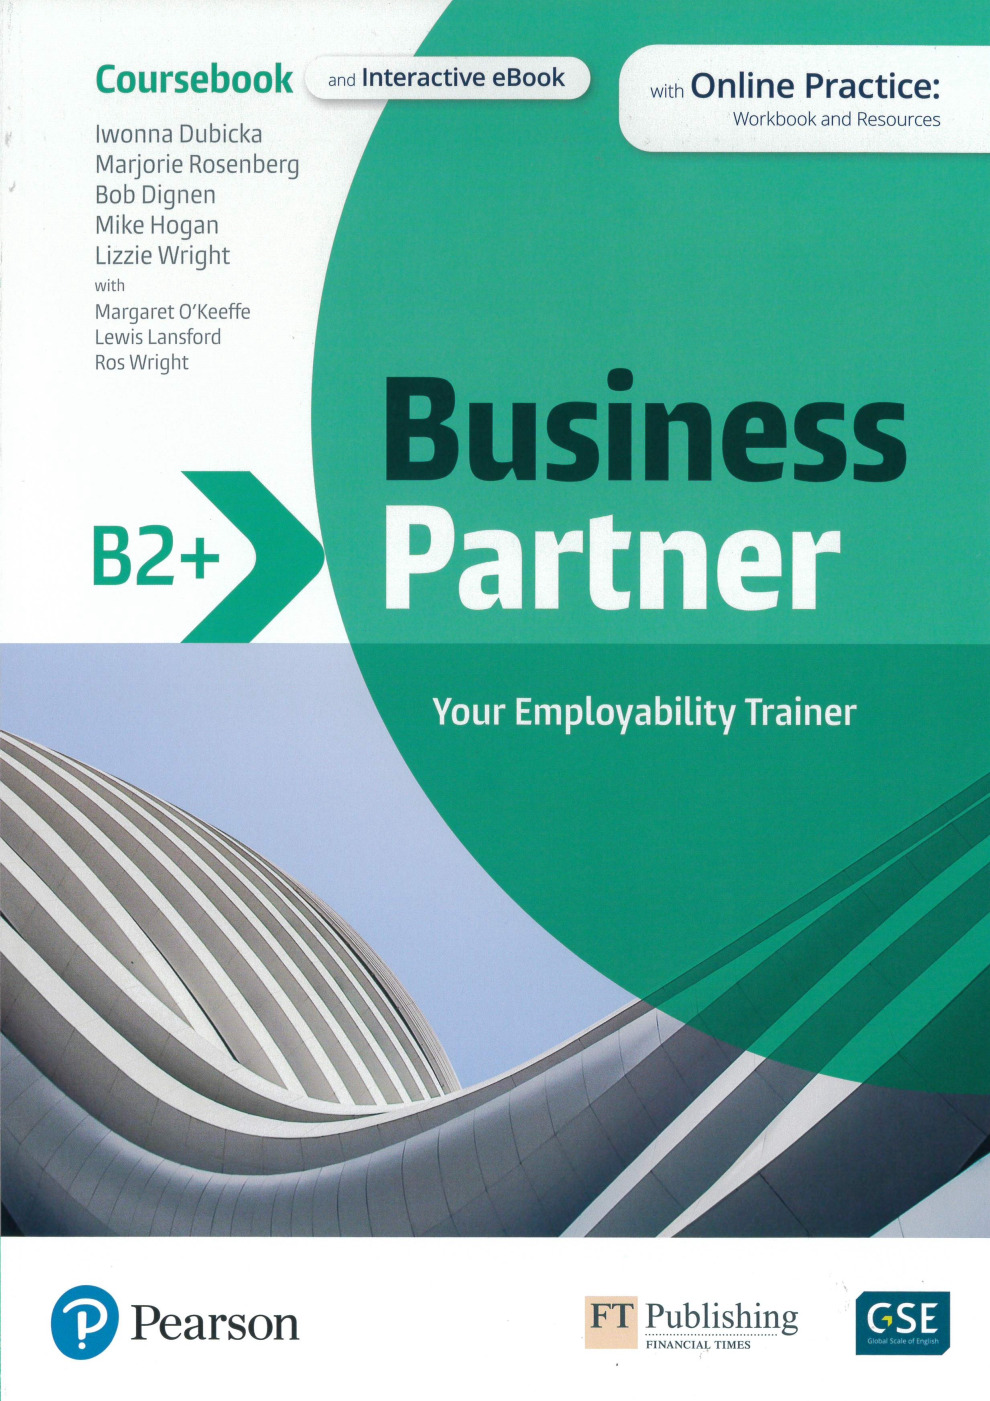 Business Partner B2+ Coursebook and Interactive eBook with Online Practice:Workbook and Resources